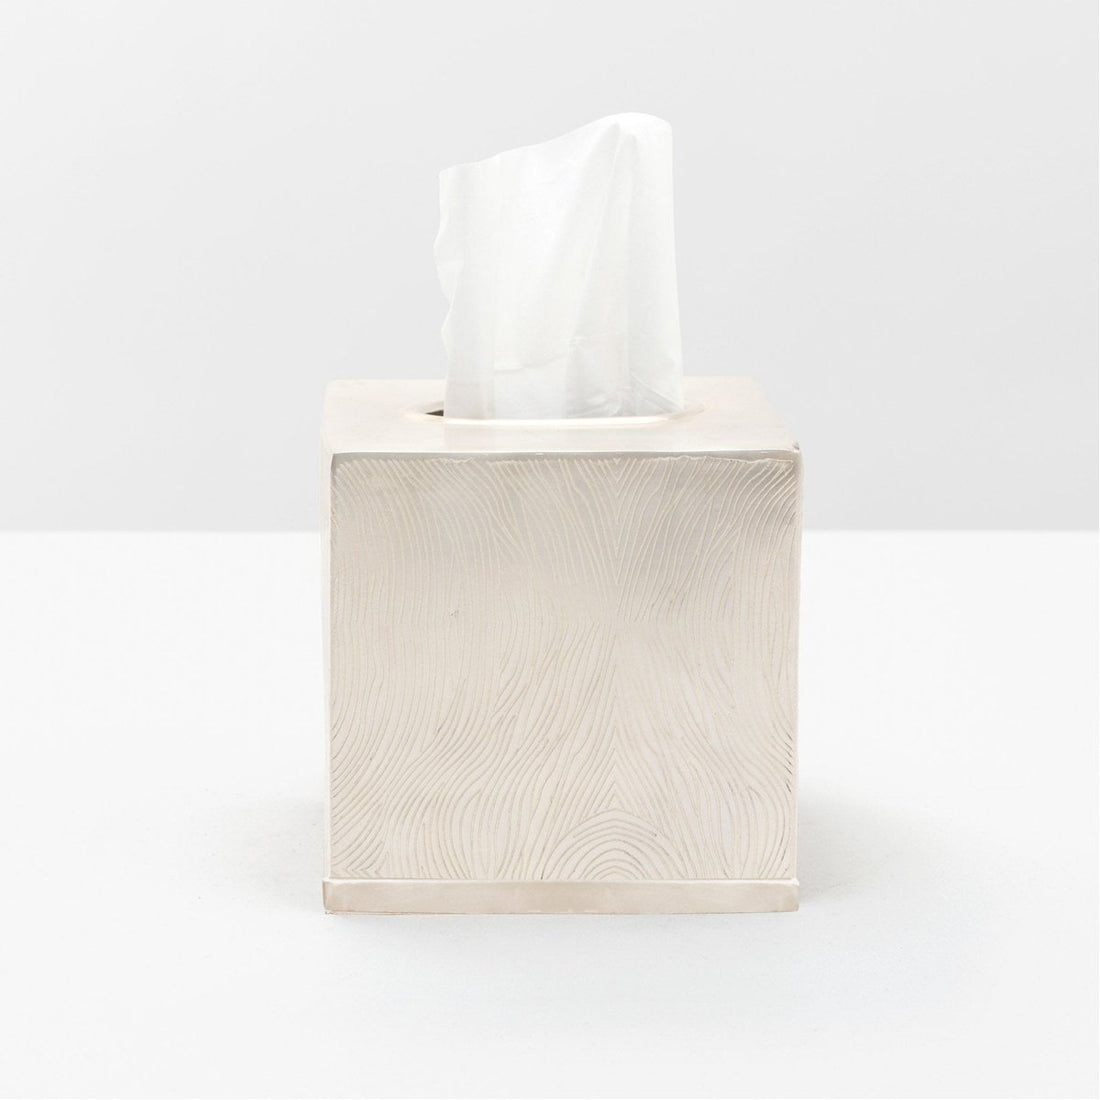 Pigeon and Poodle Humbolt Tissue Box, Square